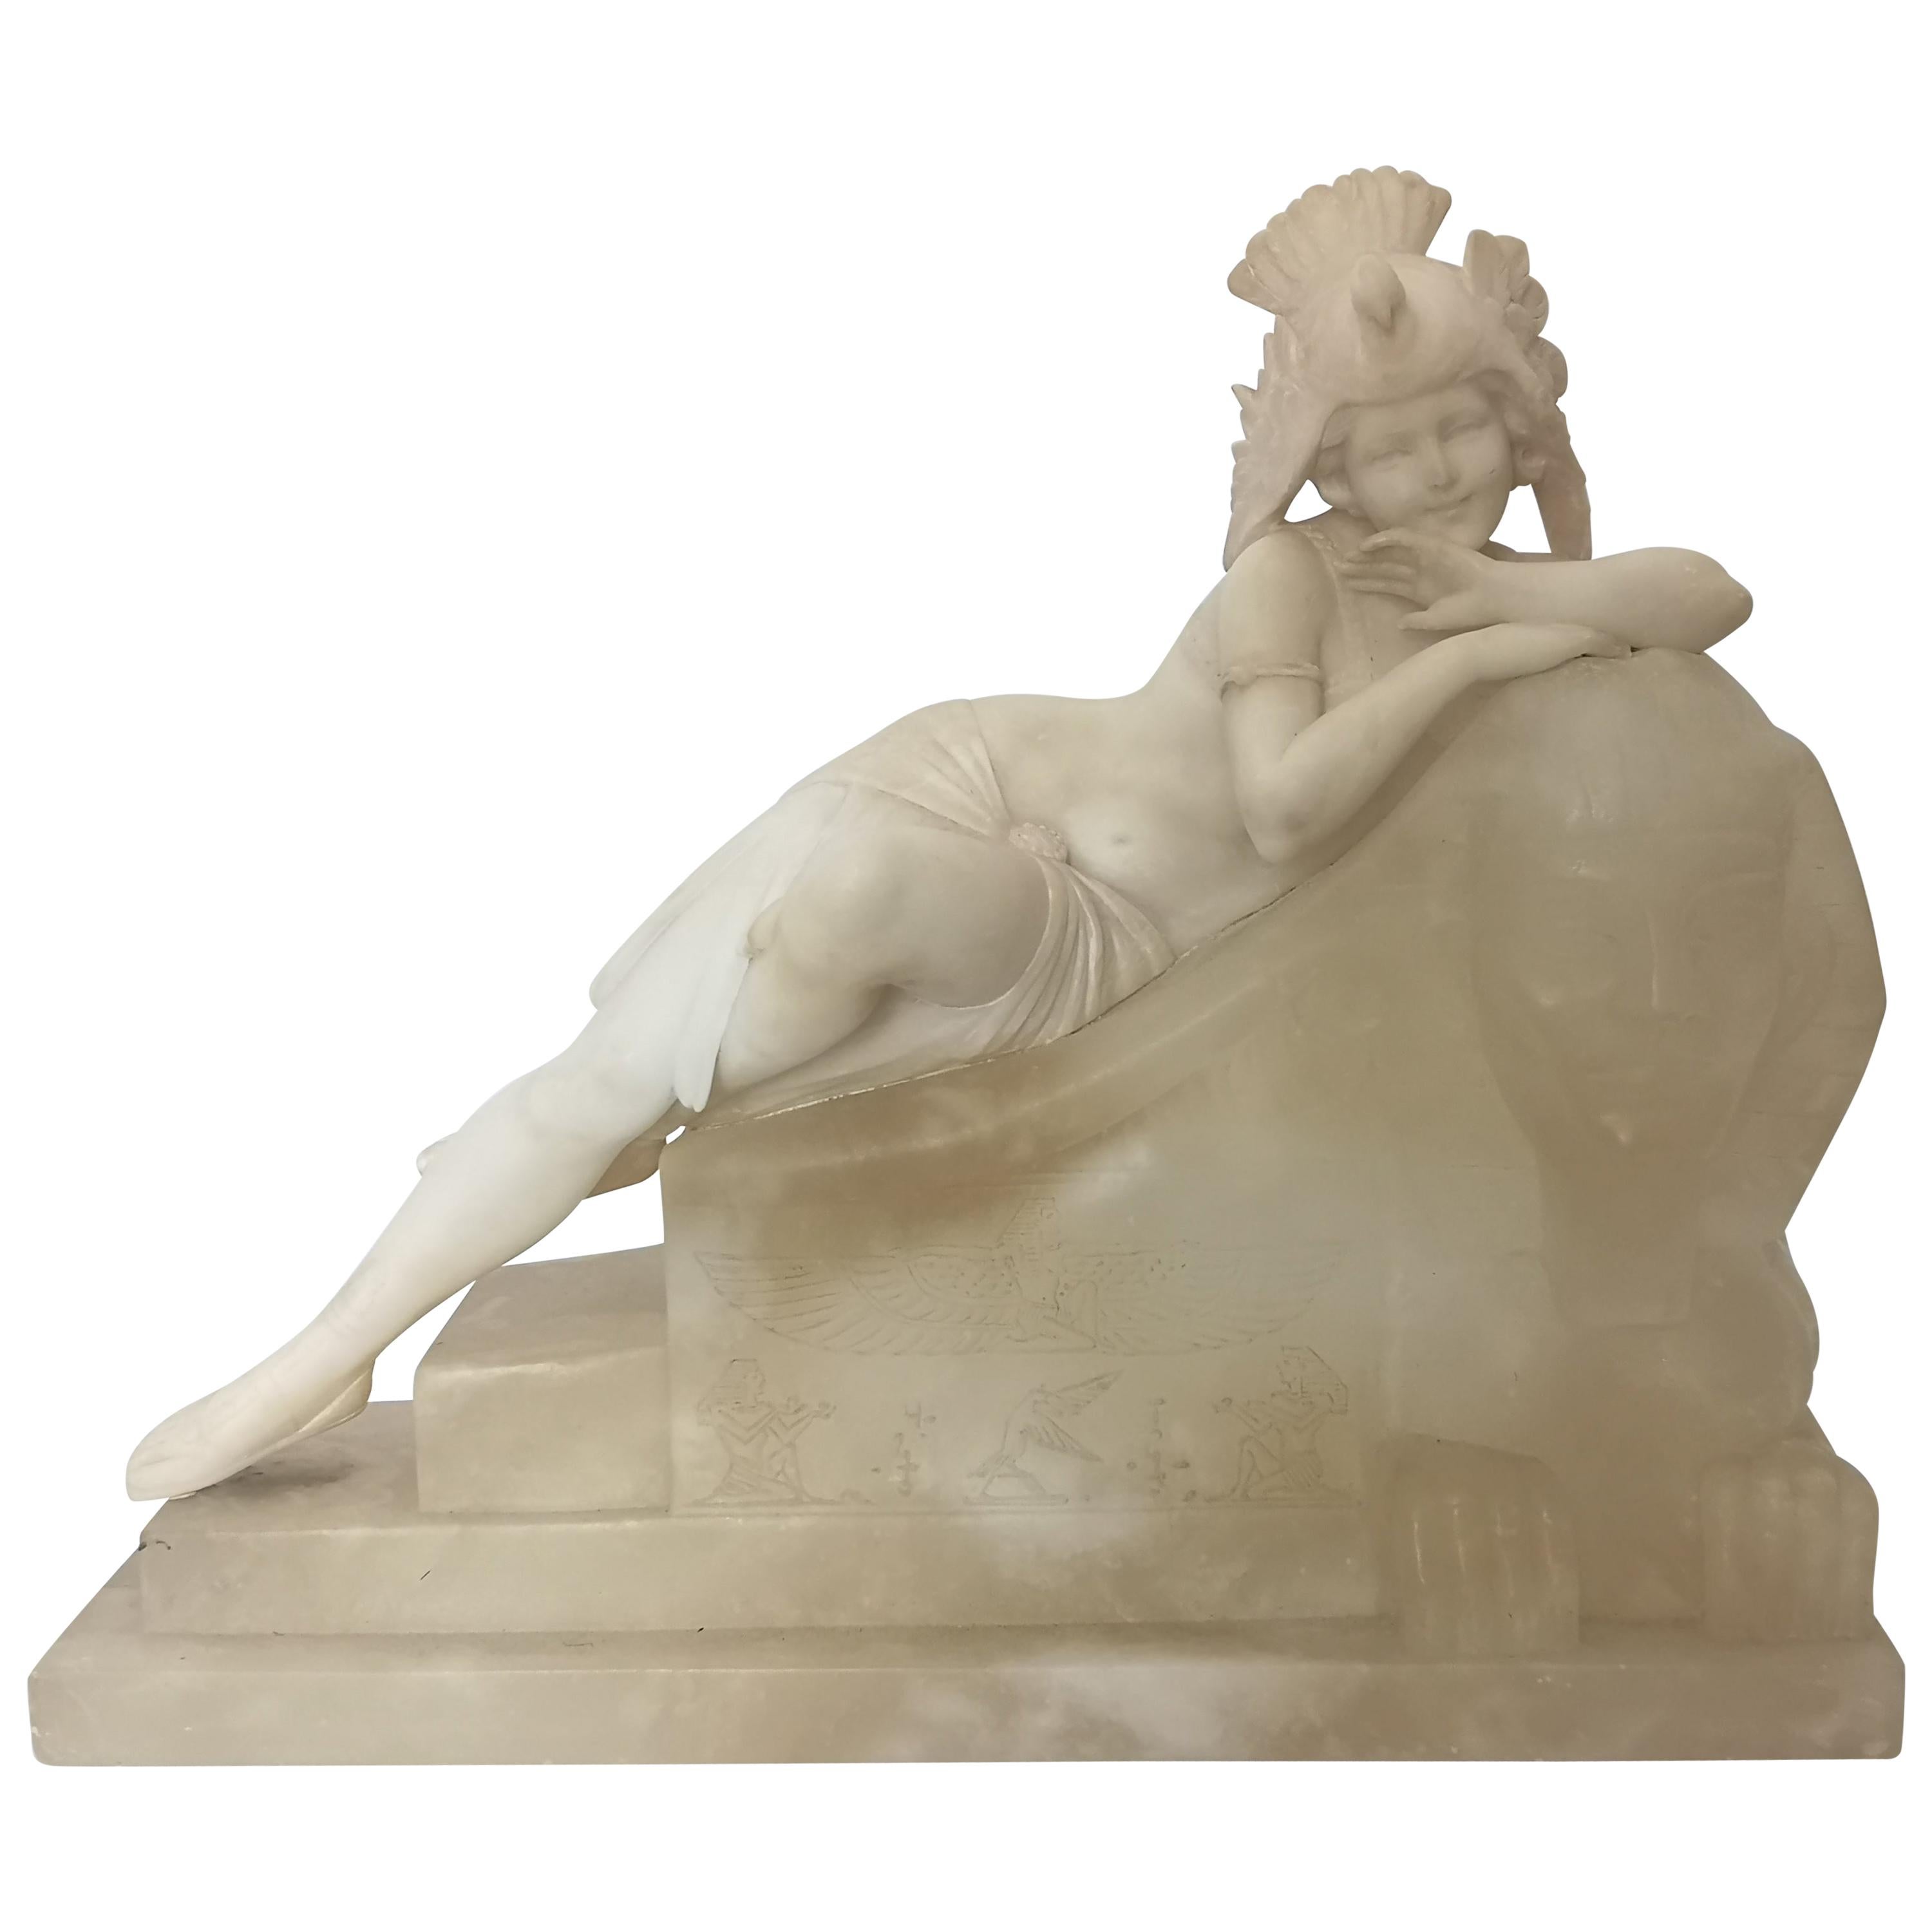 20th Century Art Deco Fantasy Sculpture / Lamp of a Lady on a Sphinx